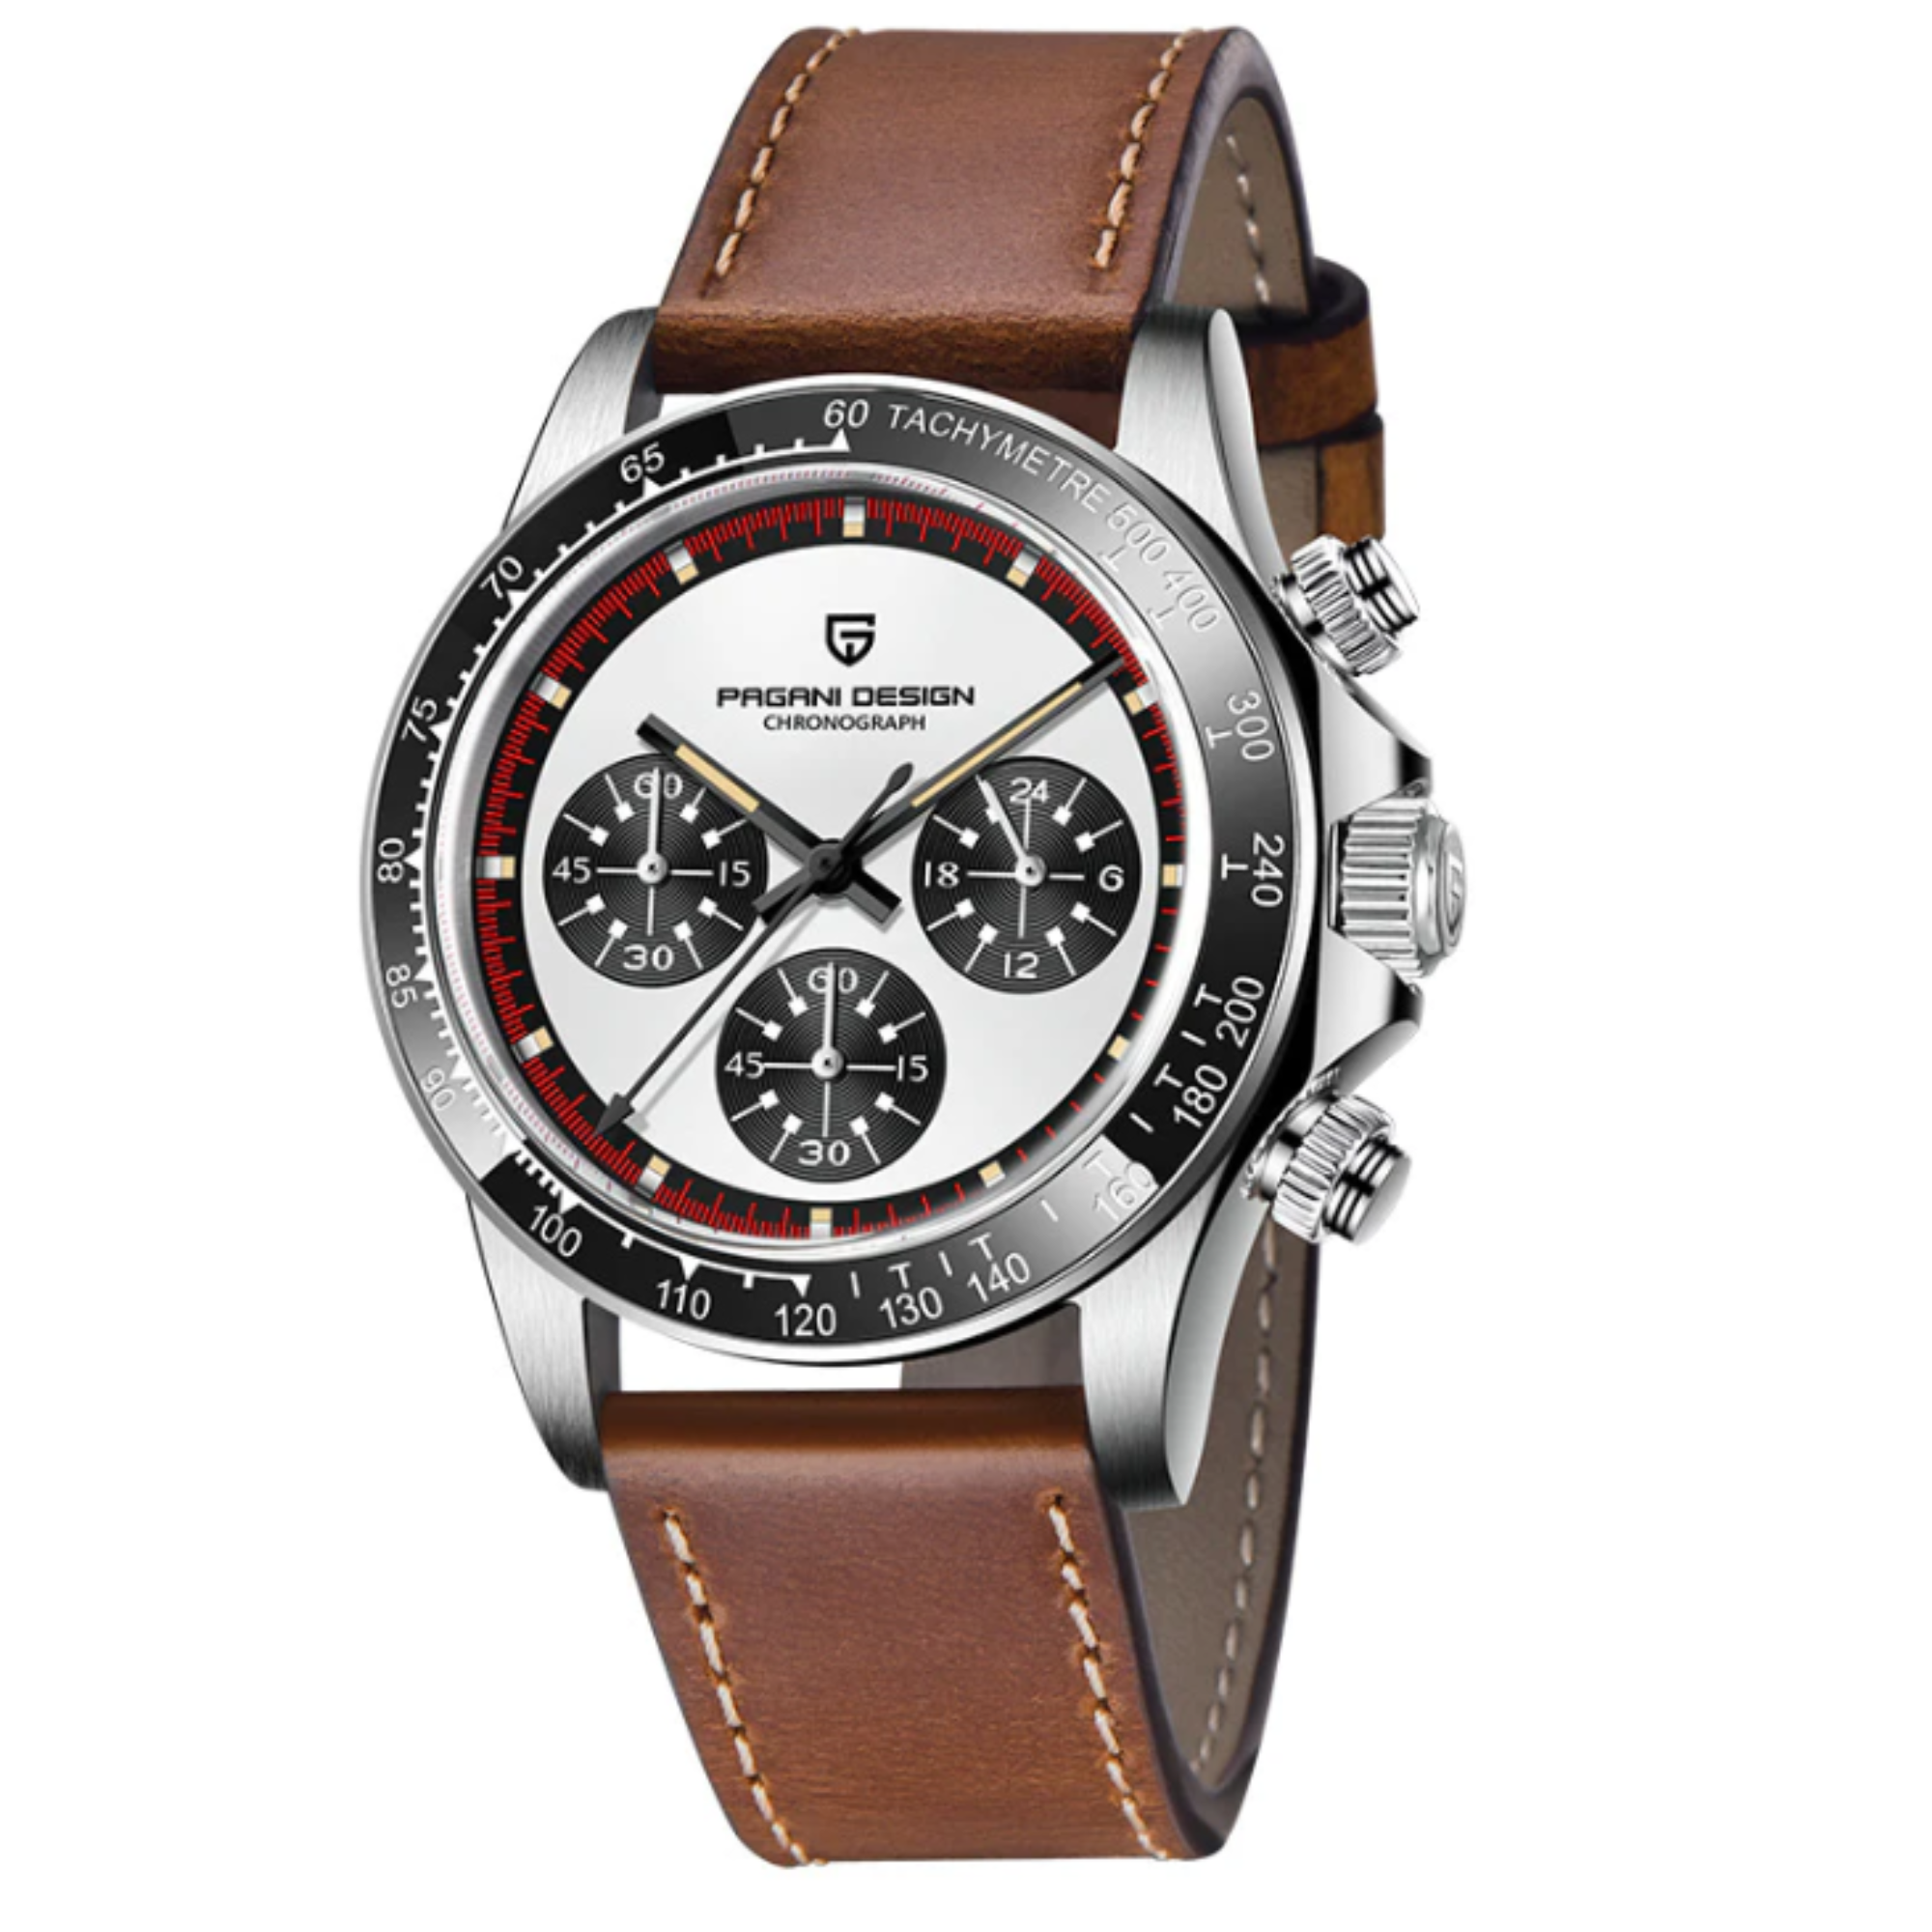 Pagani Design PD-1676 Paul Newman Chronograph Luxury Waterproof Movement (Japanese VK63) | Stainless Steel Men's 40MM Watch - White Dial With Leather Strap